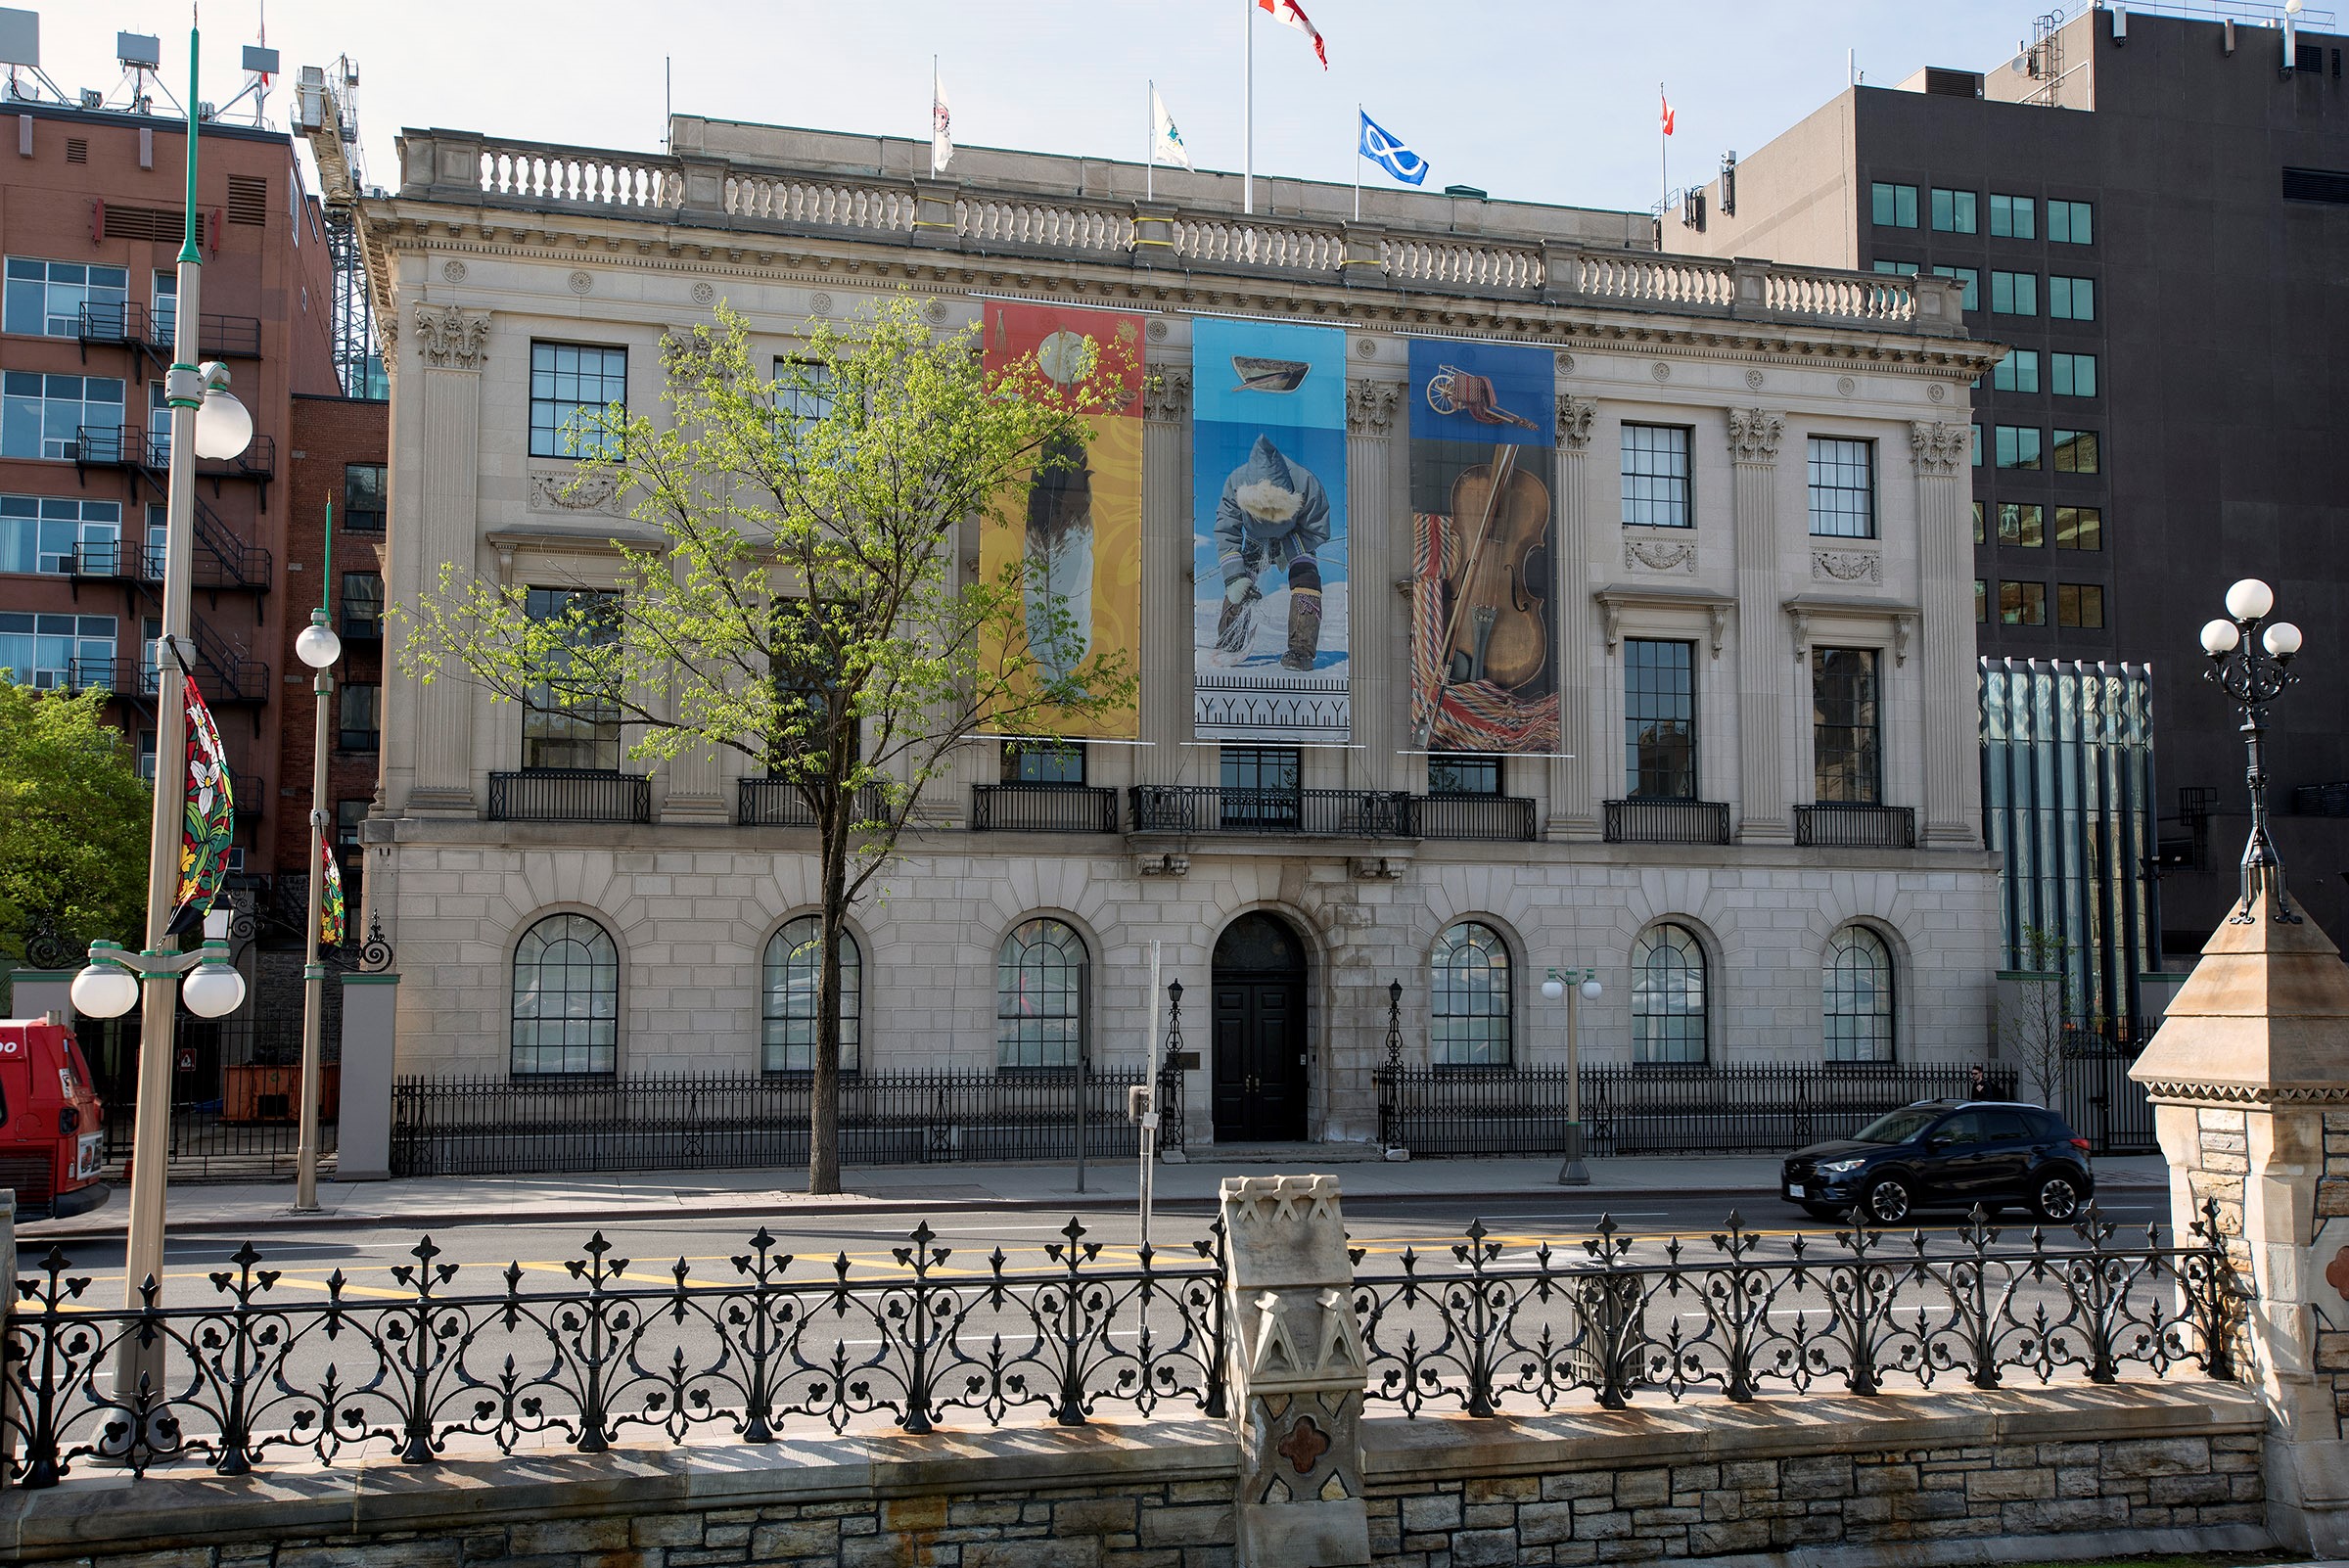 View enlarged image of the 100 Wellington building with three banners depicting Indigenous Peoples and objects.